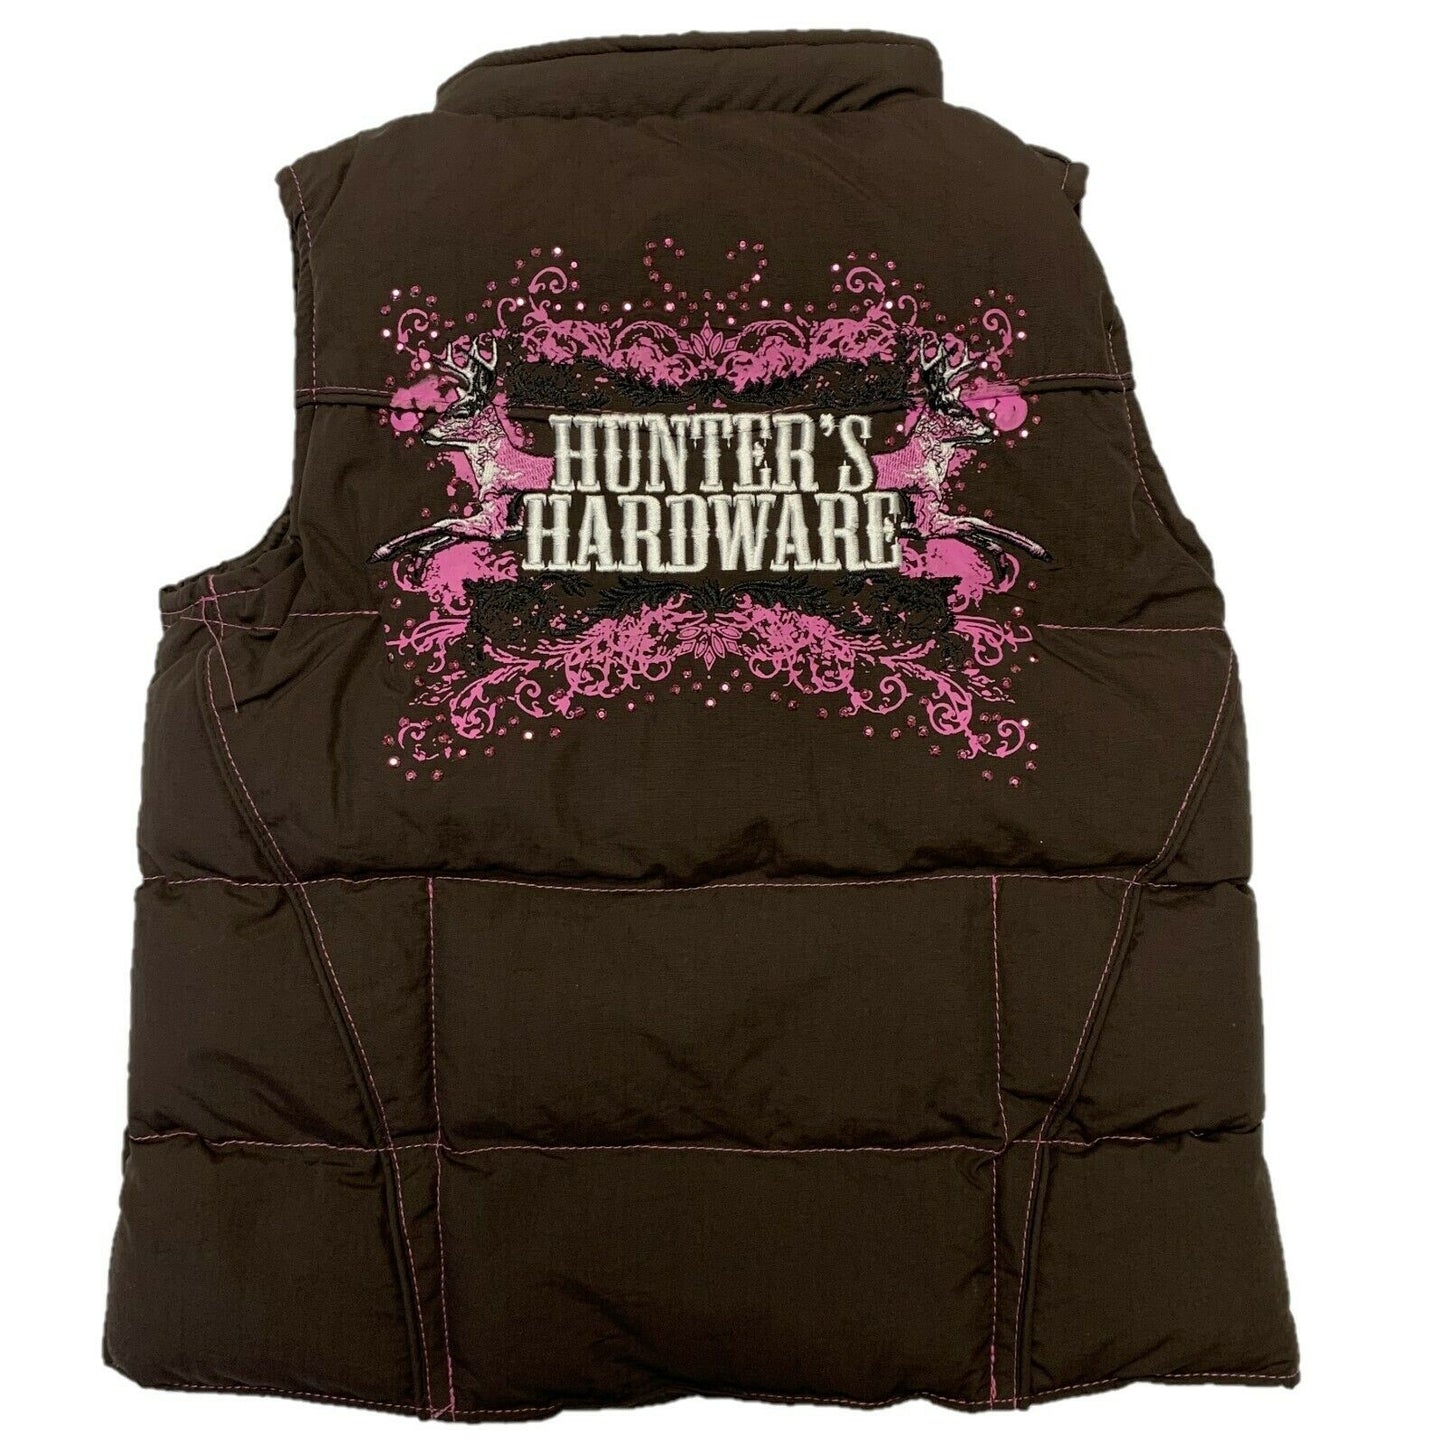 Hunters Hardware Girl's Brown Poly-Fill Vest 886088-660